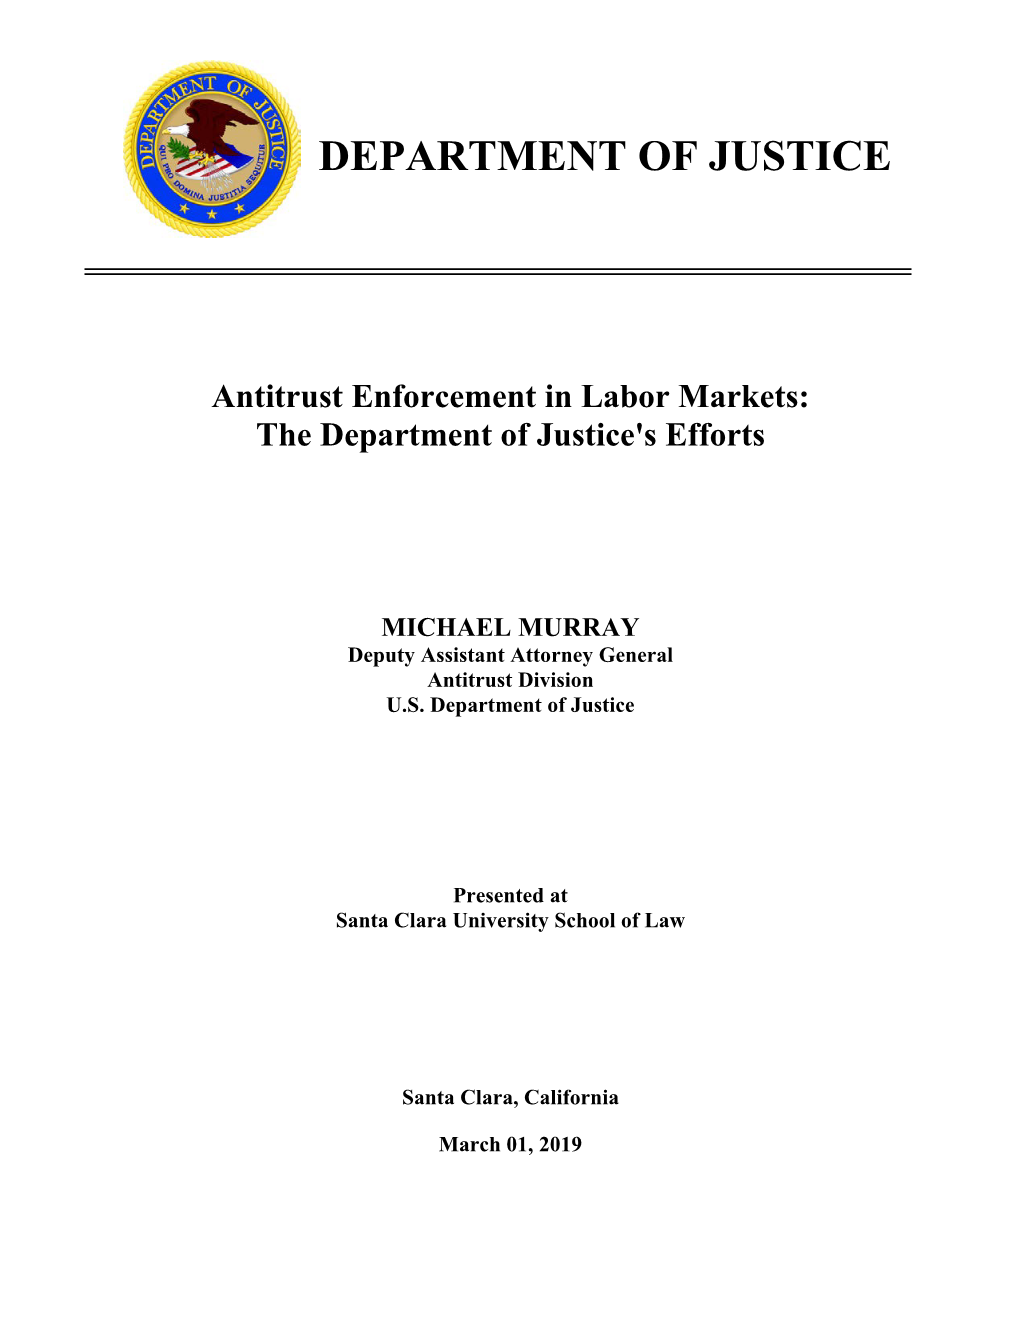 Antitrust Enforcement in Labor Markets: the Department of Justice's Efforts